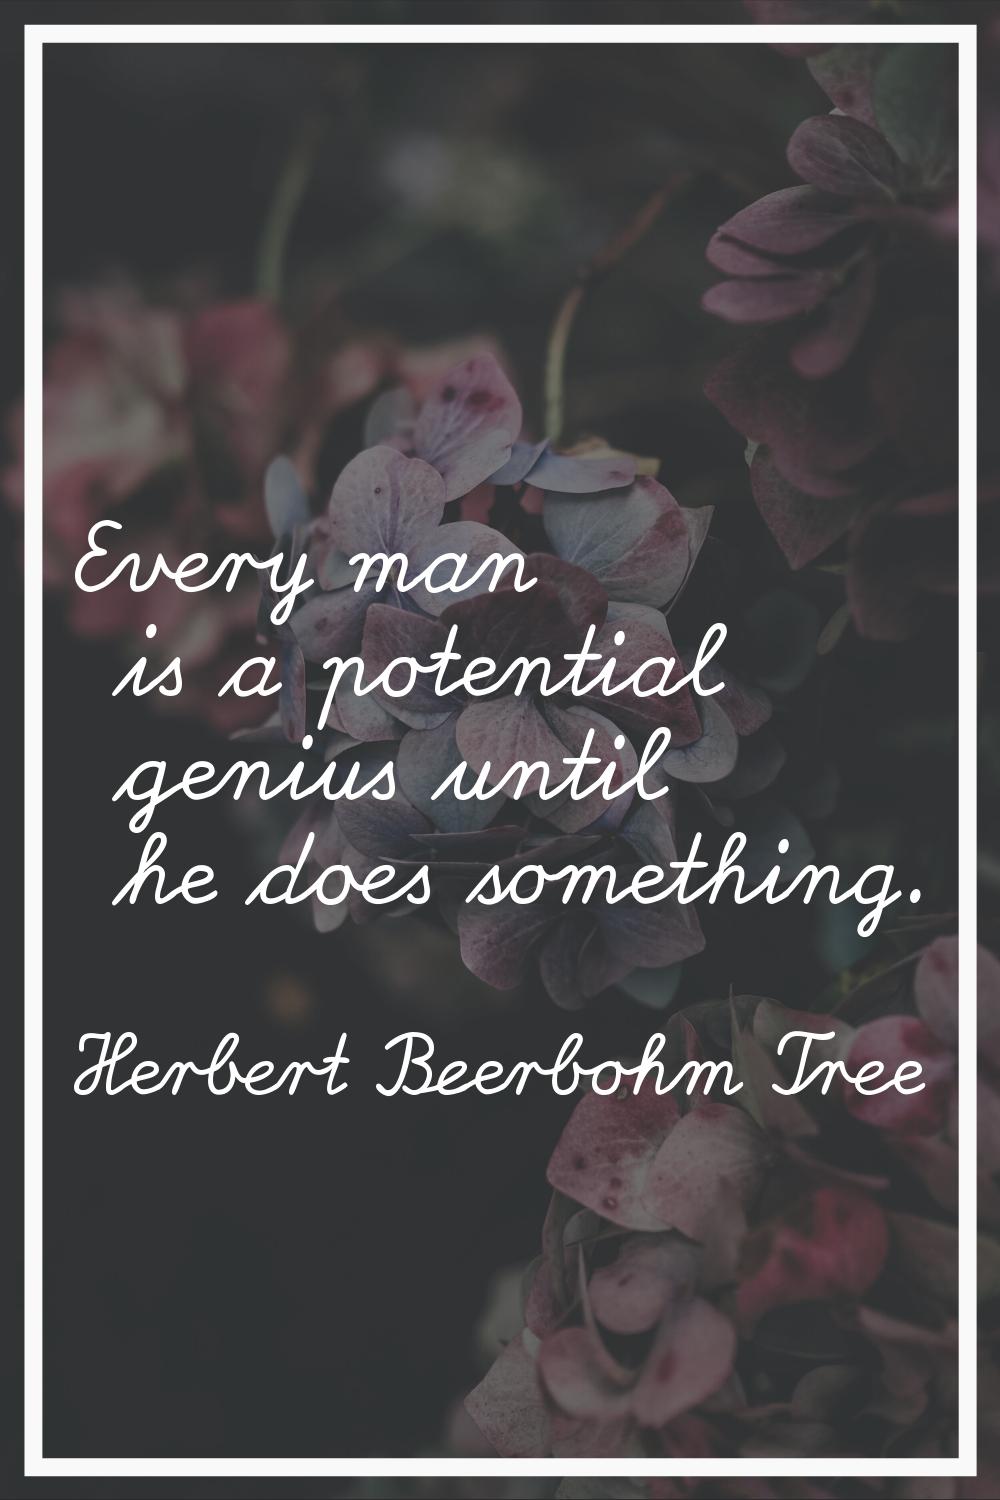 Every man is a potential genius until he does something.